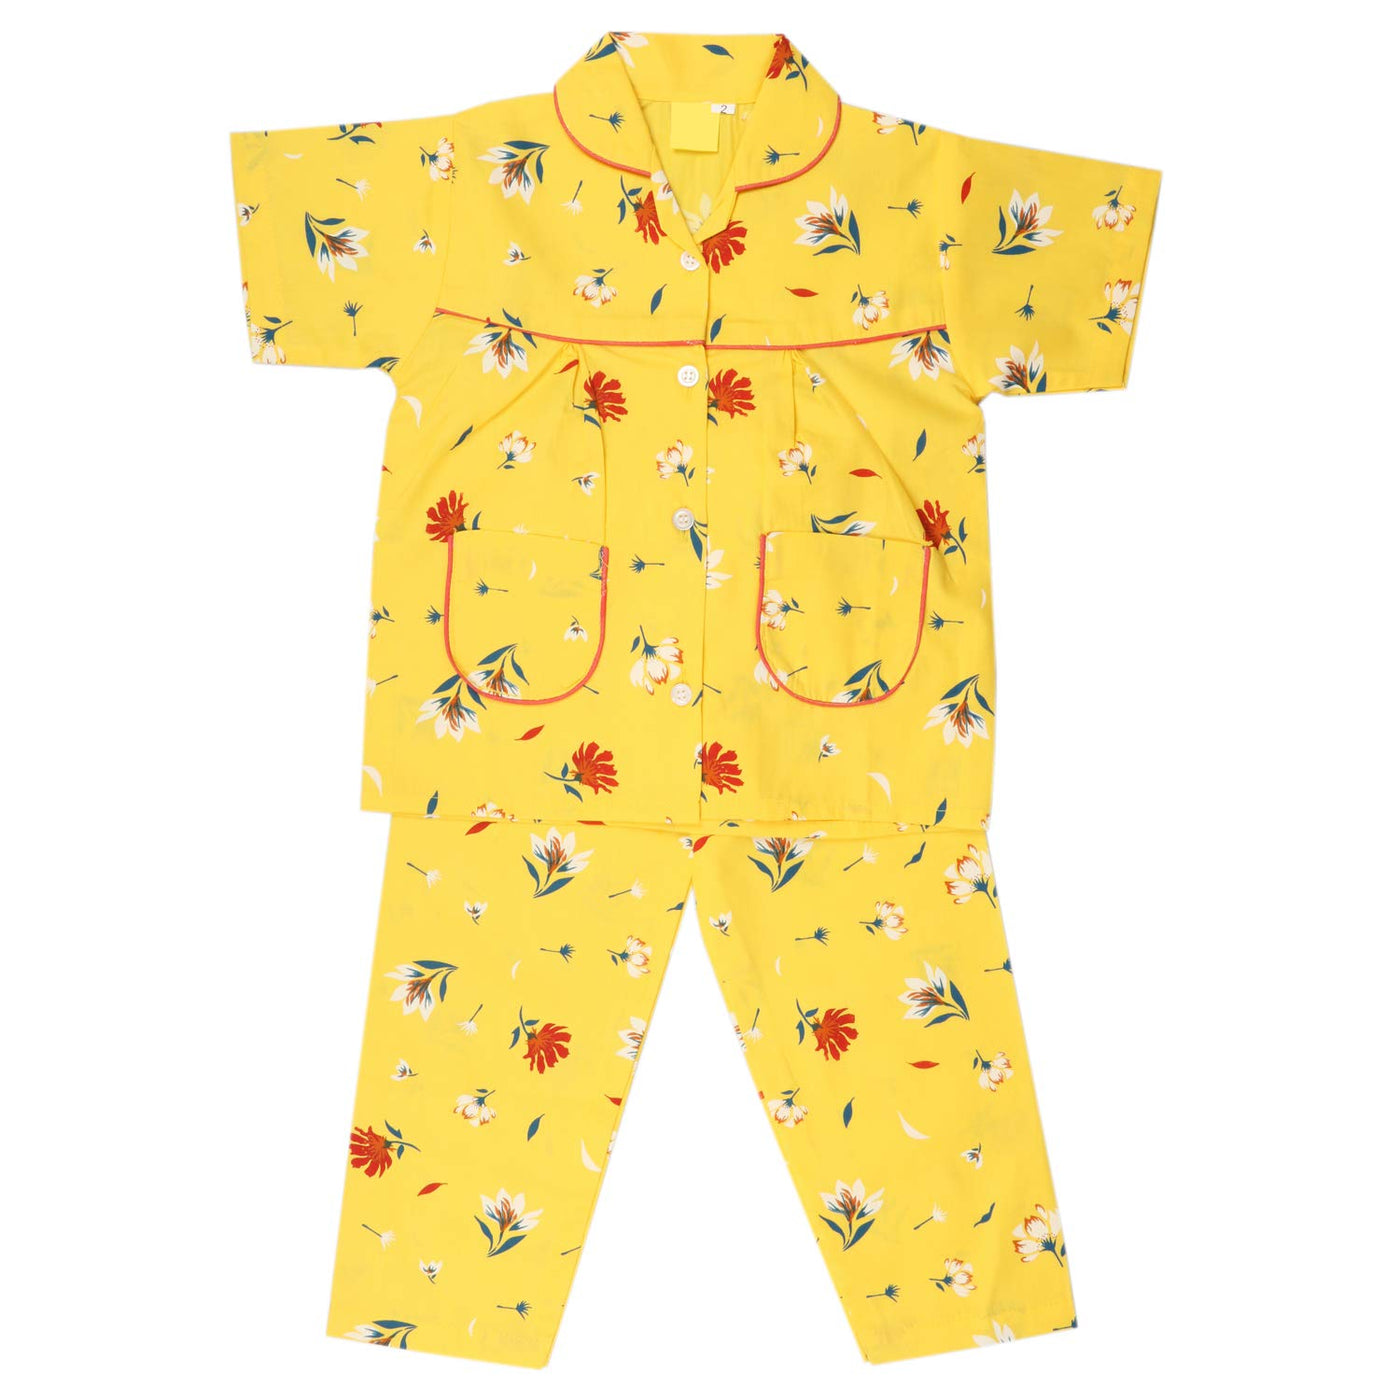 Boys Night Suit with front open Manufacturer, Boys Night Suit with front  open Wholesaler and Supplier in Kolkata